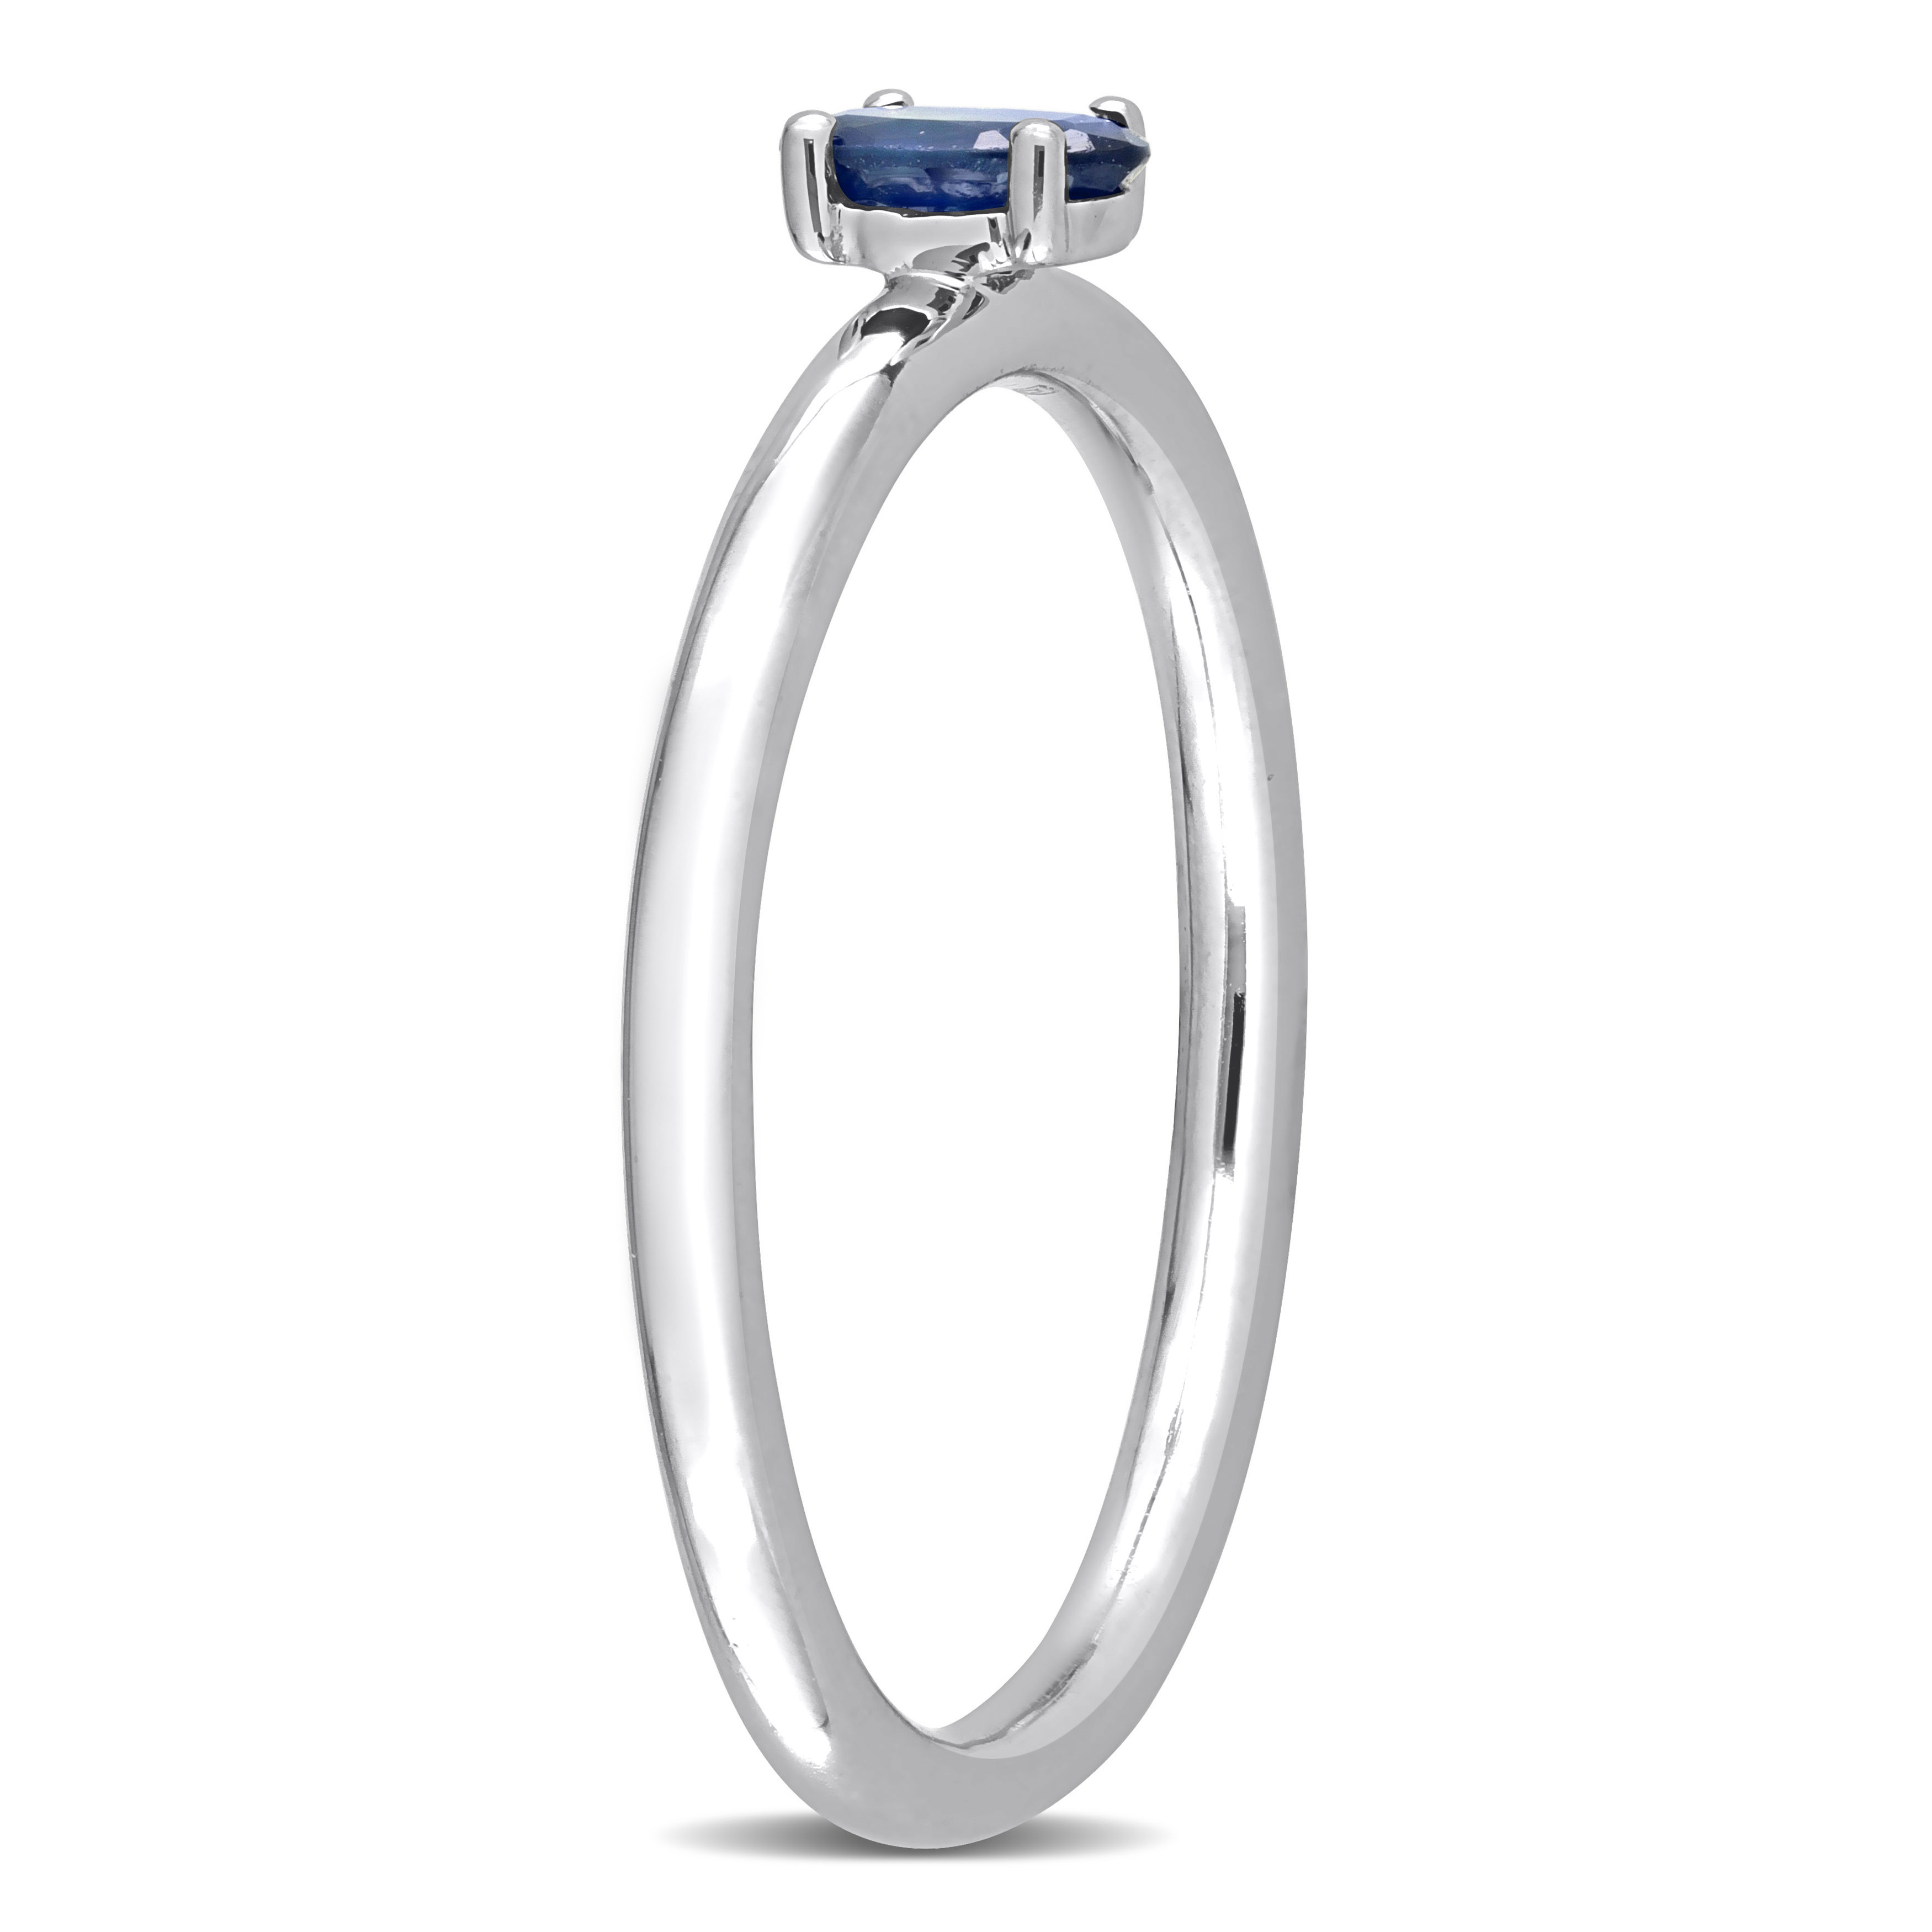 1/3 CT TGW Oval Blue Sapphire Stackable Ring in 10k White Gold